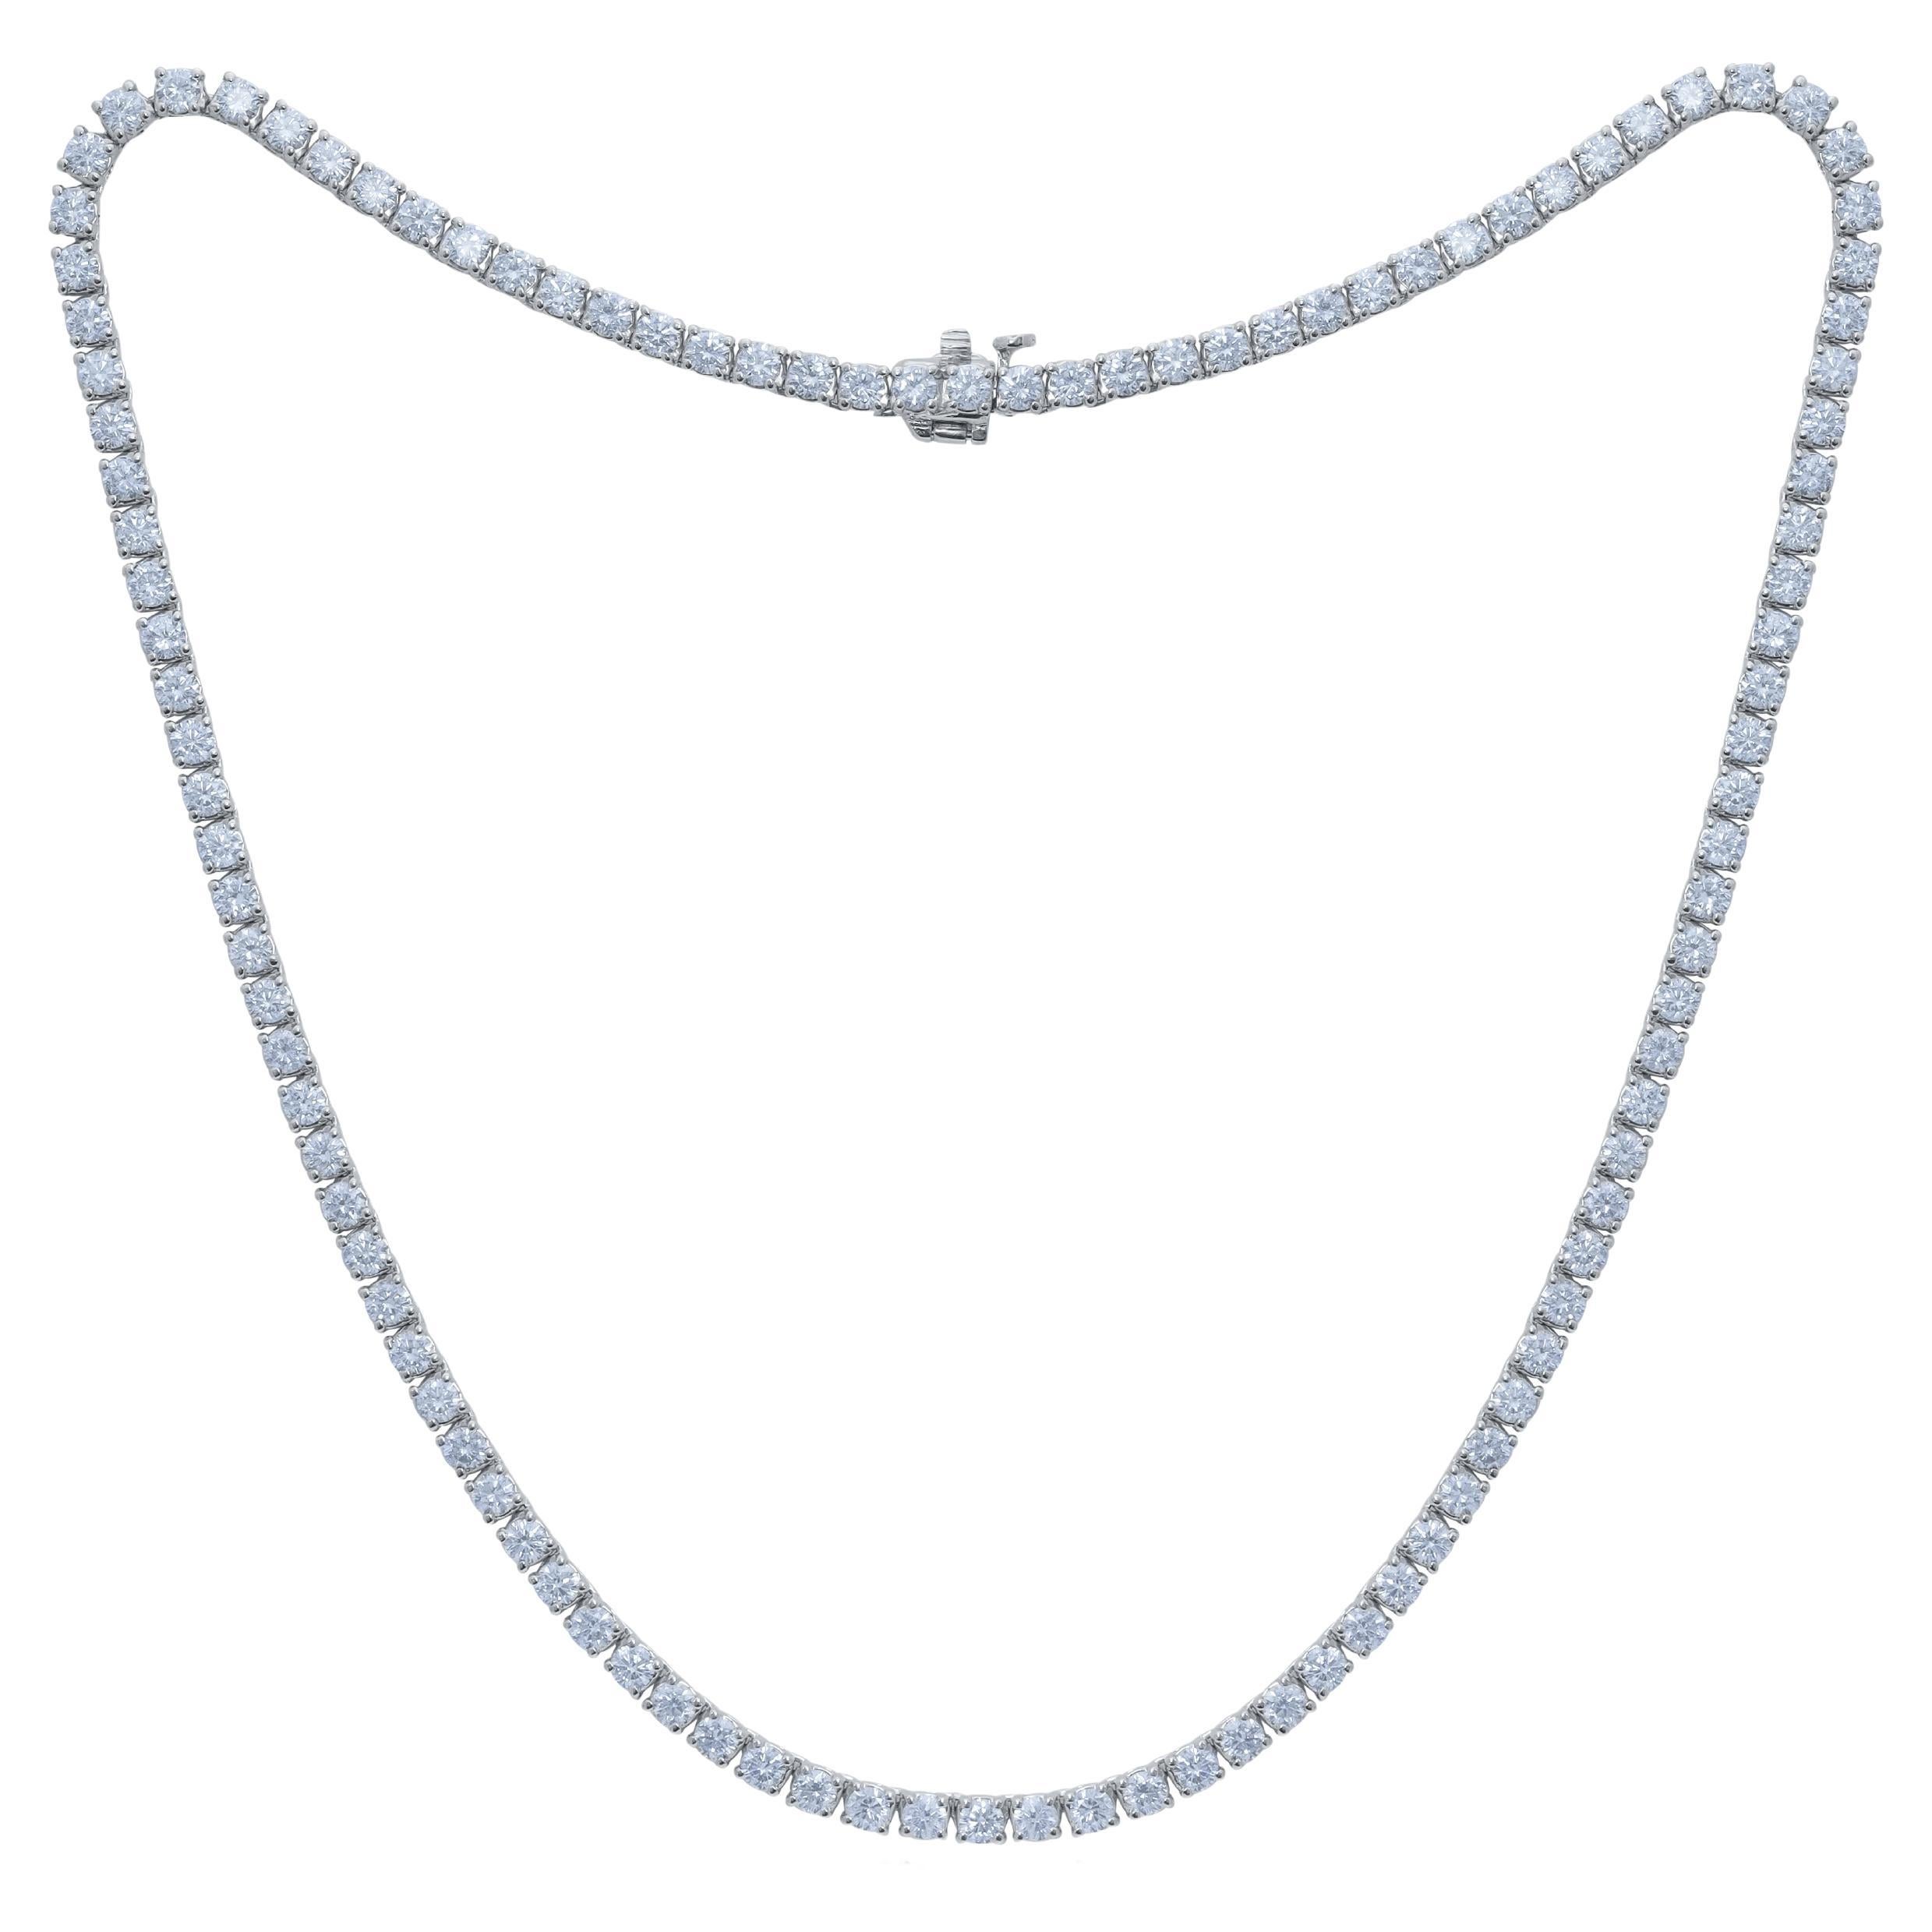 Diana M. 14 kt white gold, 18" 4 prong diamond tennis necklace featuring 10.50  For Sale